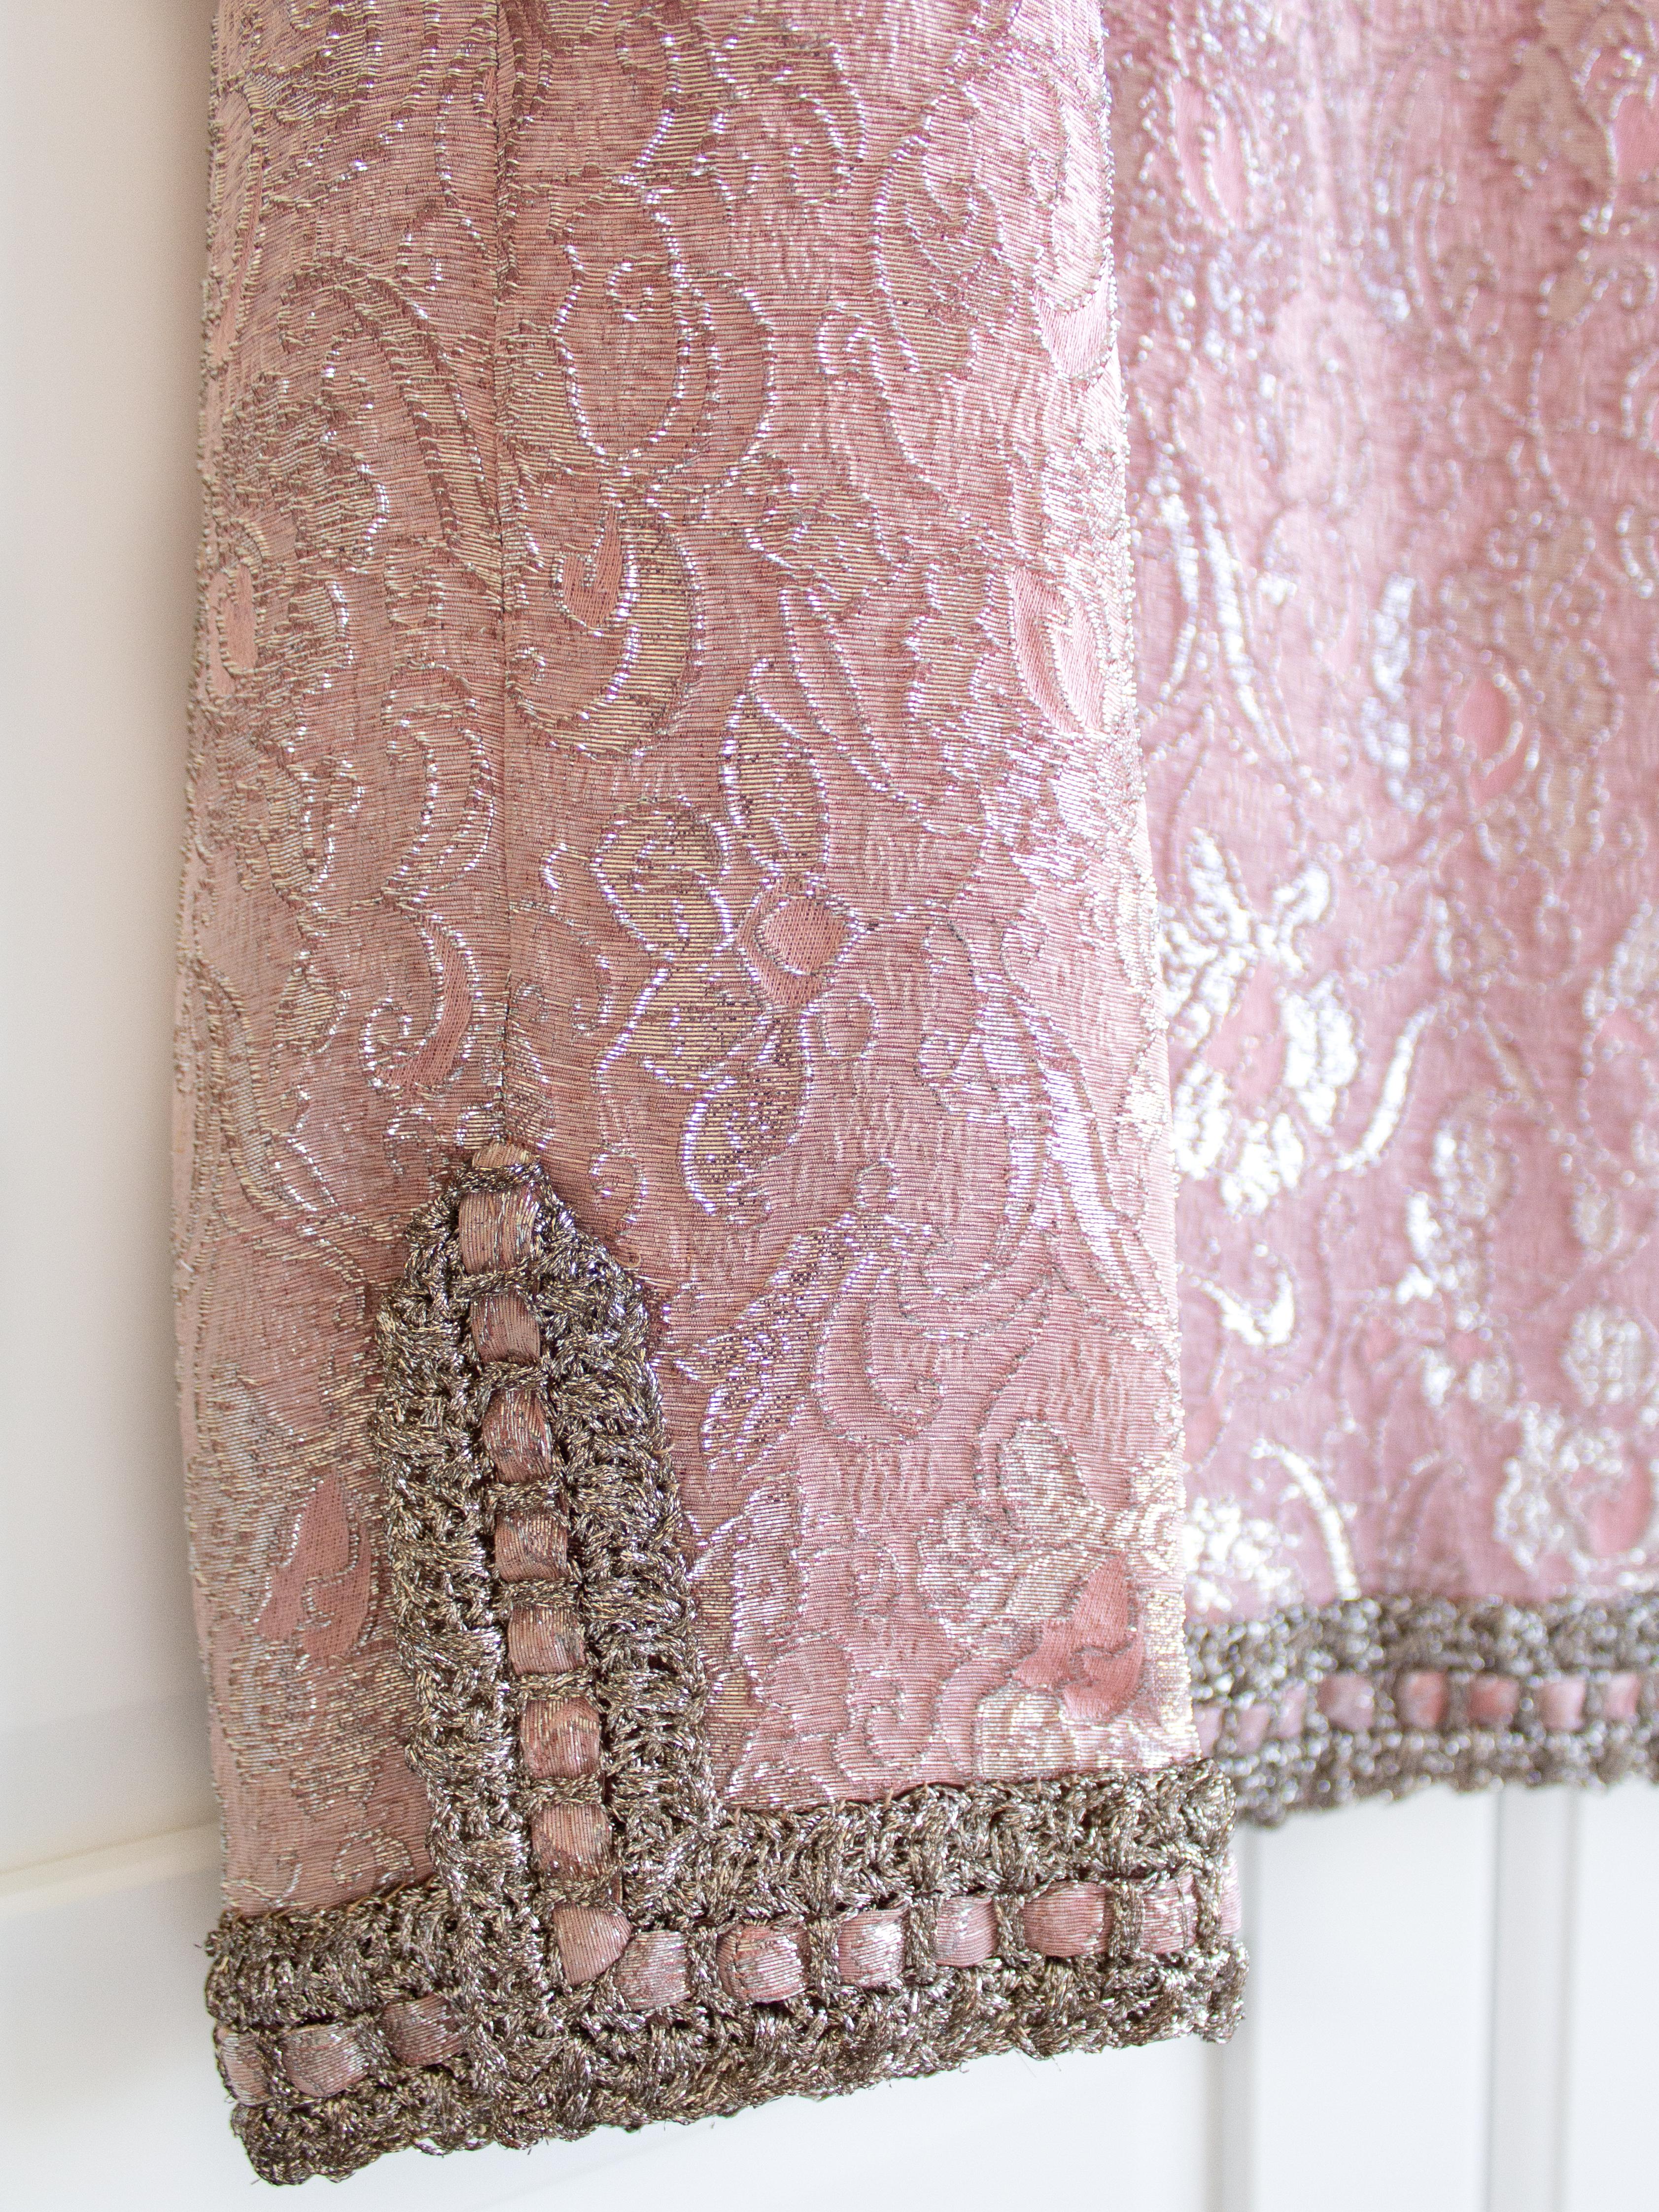 Chanel Vintage Haute Couture 1960s Pink Silver Braided Brocade Jacket Skirt Suit 4